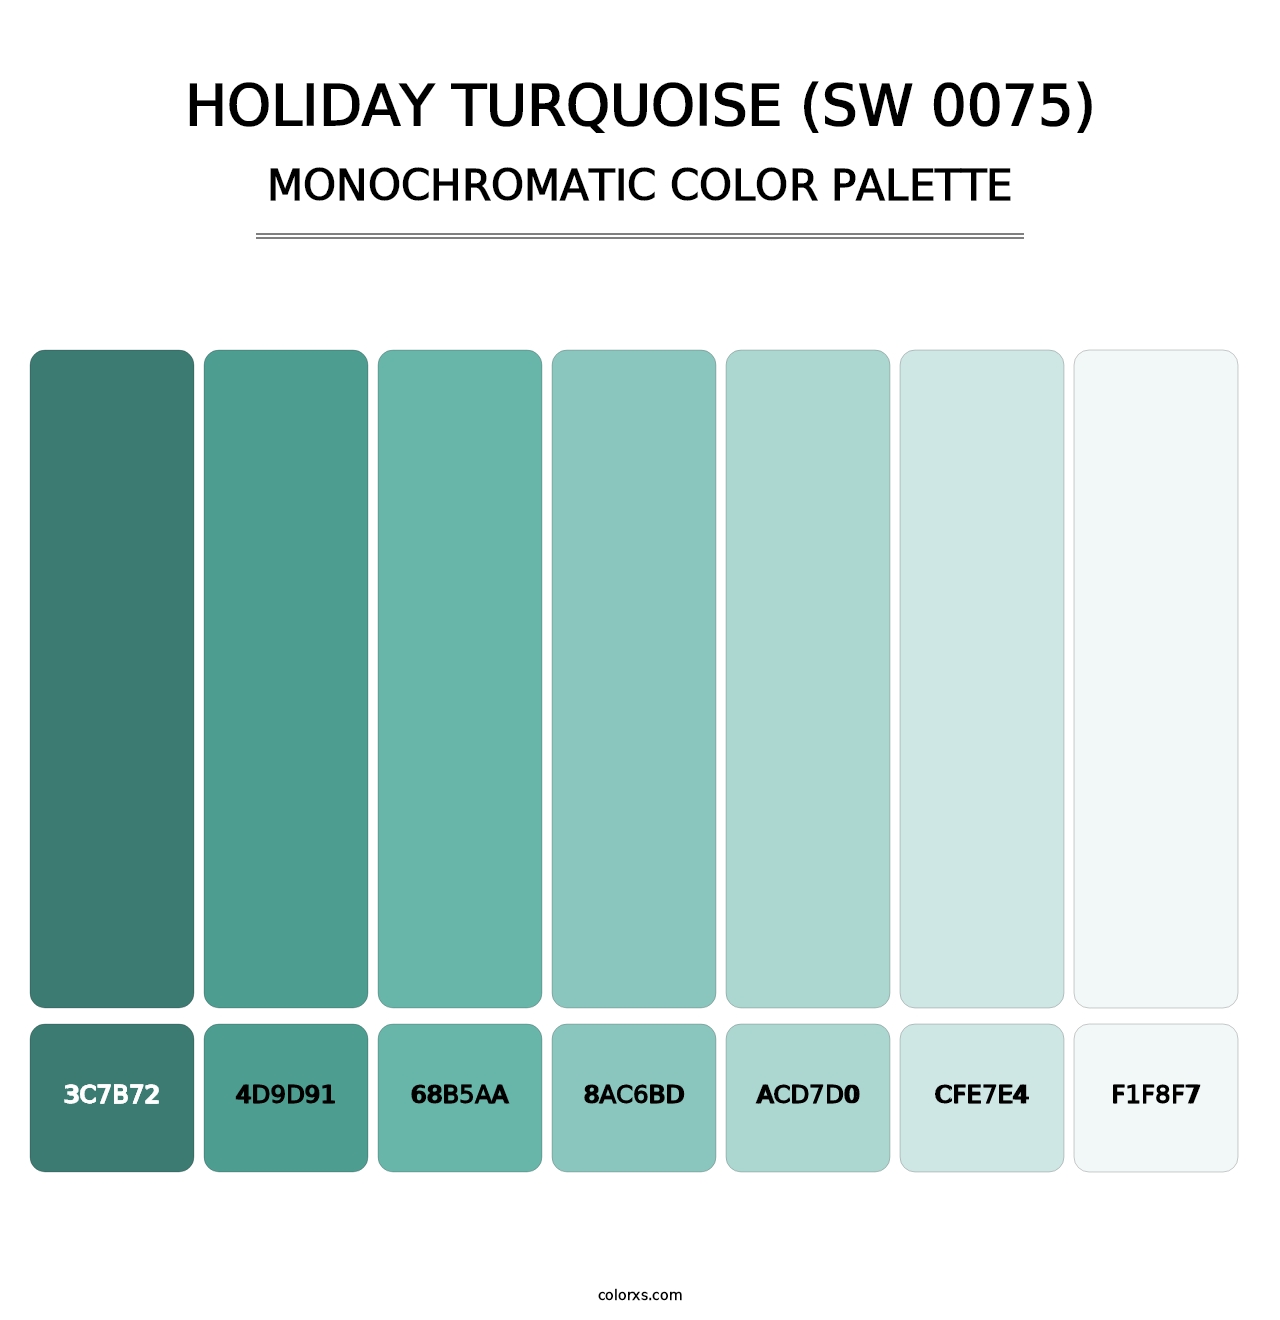 Holiday Turquoise (SW 0075) - Monochromatic Color Palette